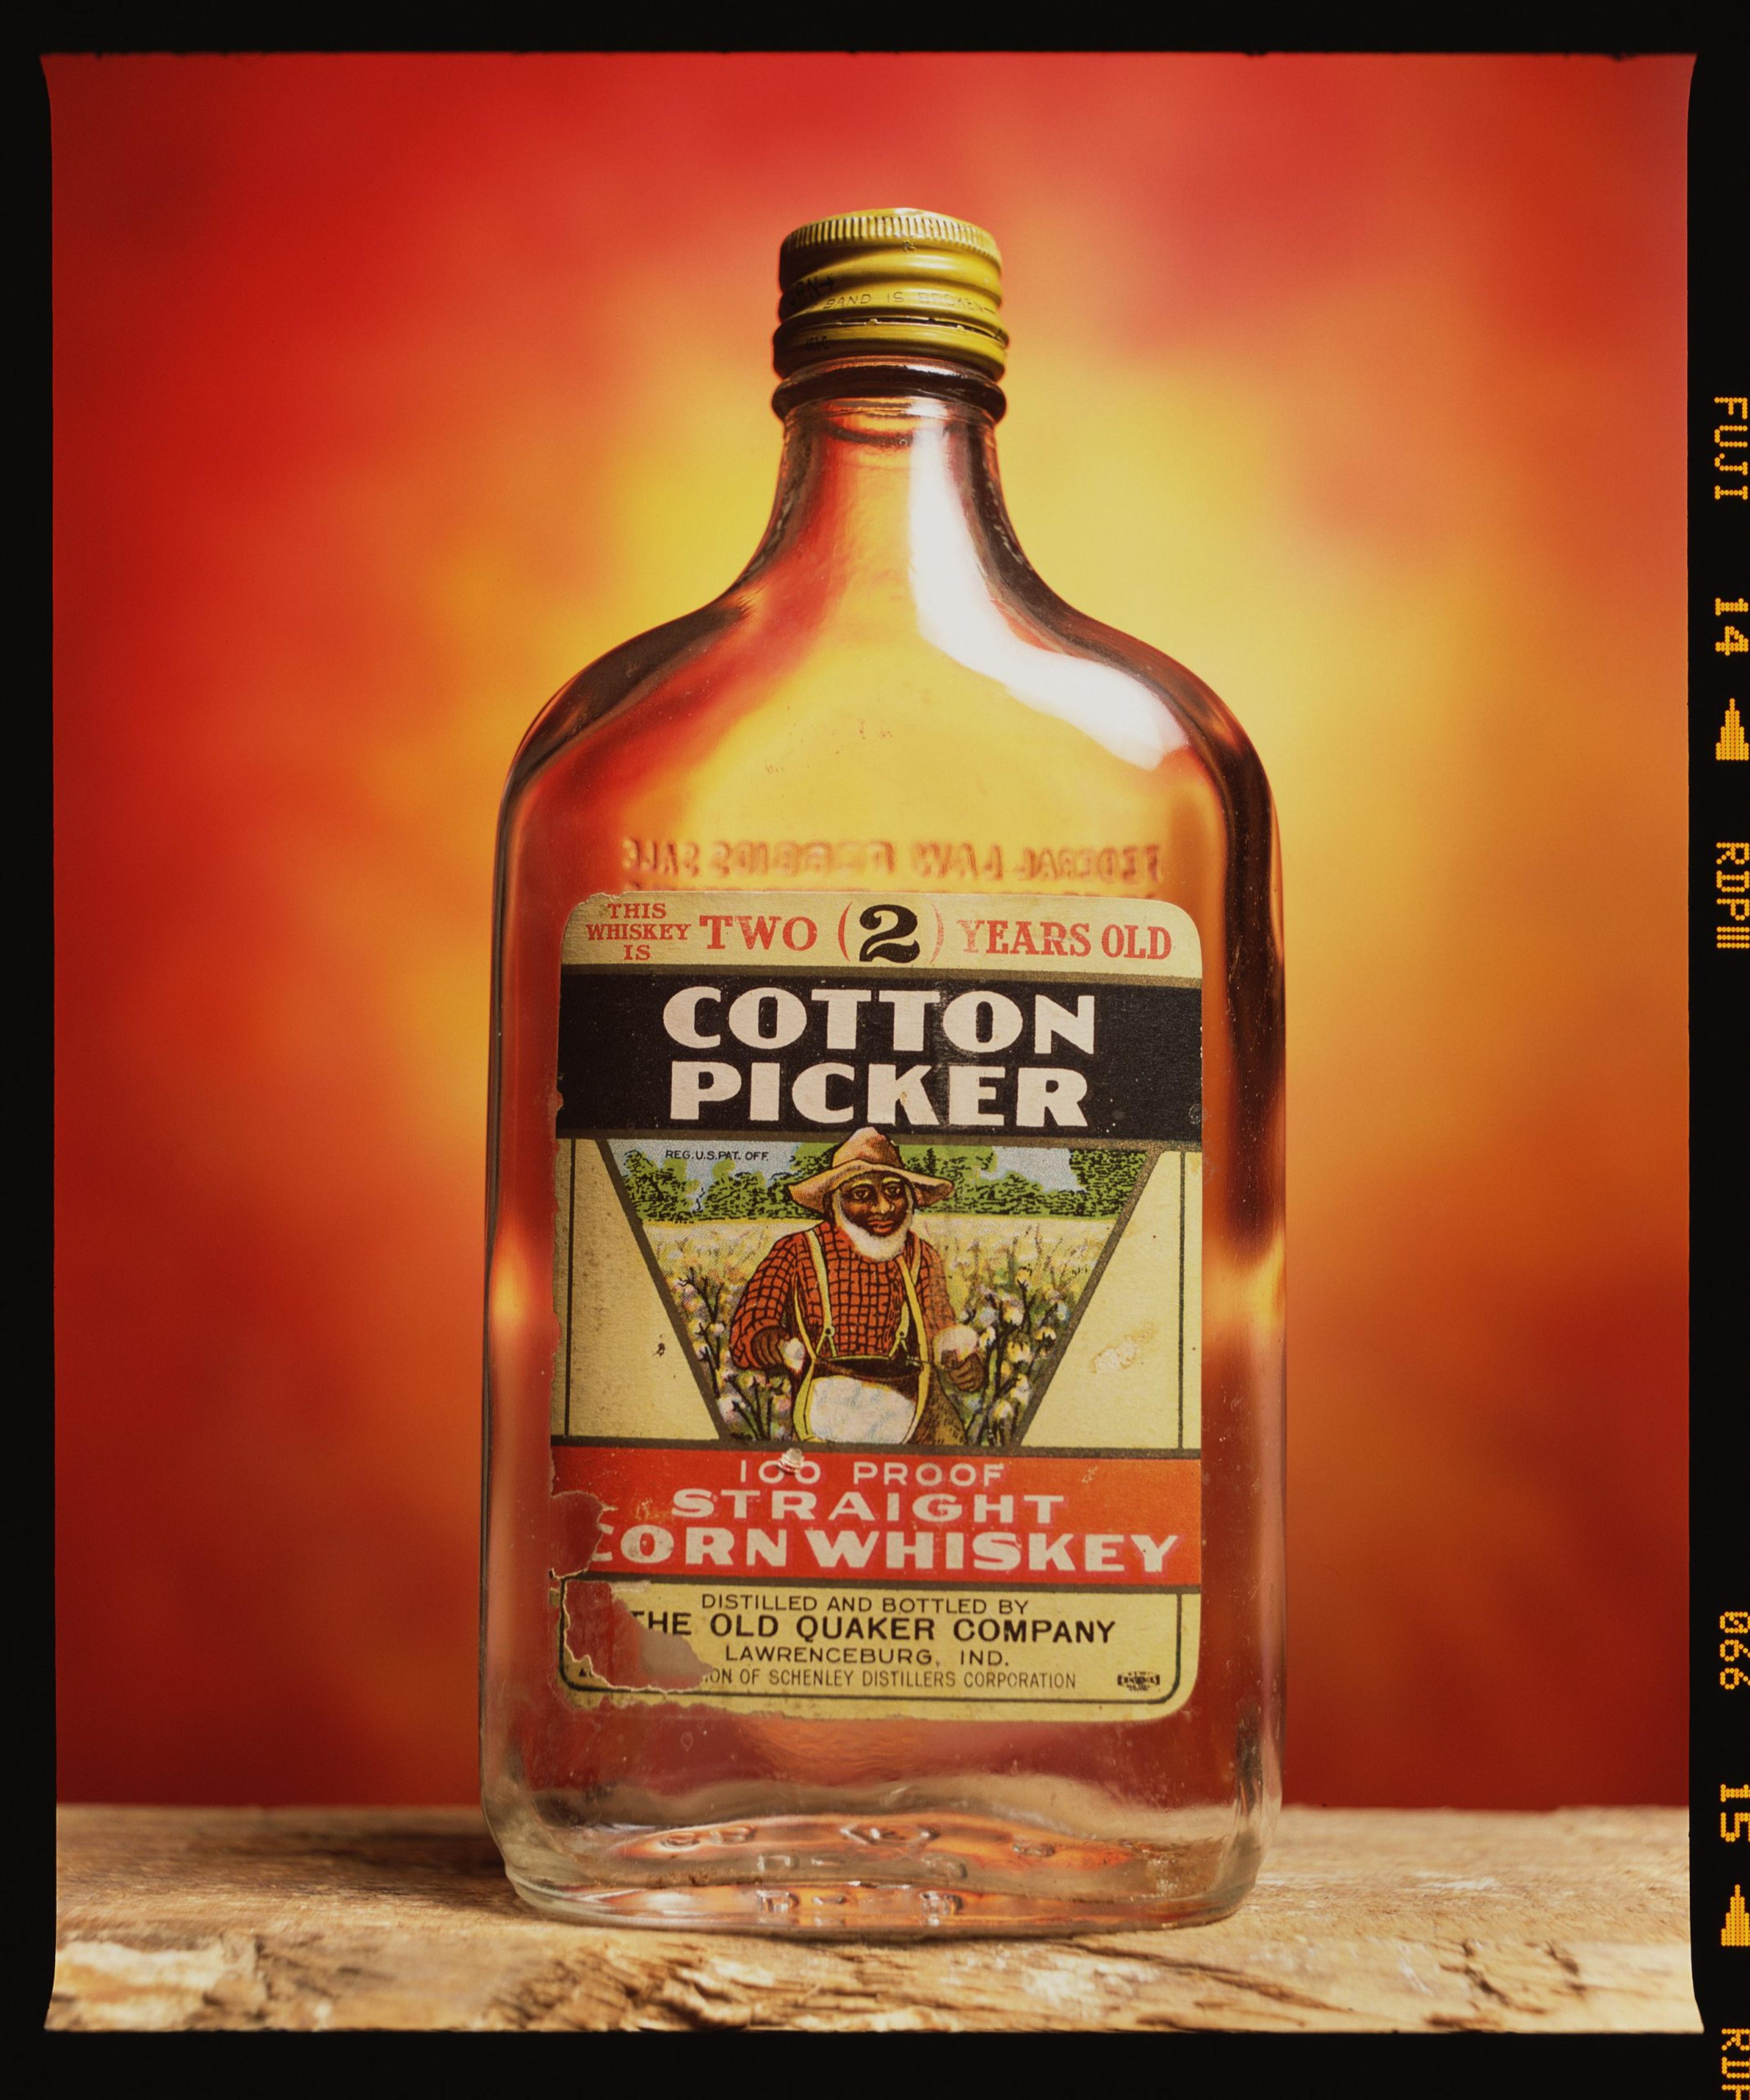 A vintage photograph of a bottle of Cotton Picker Corn Whiskey